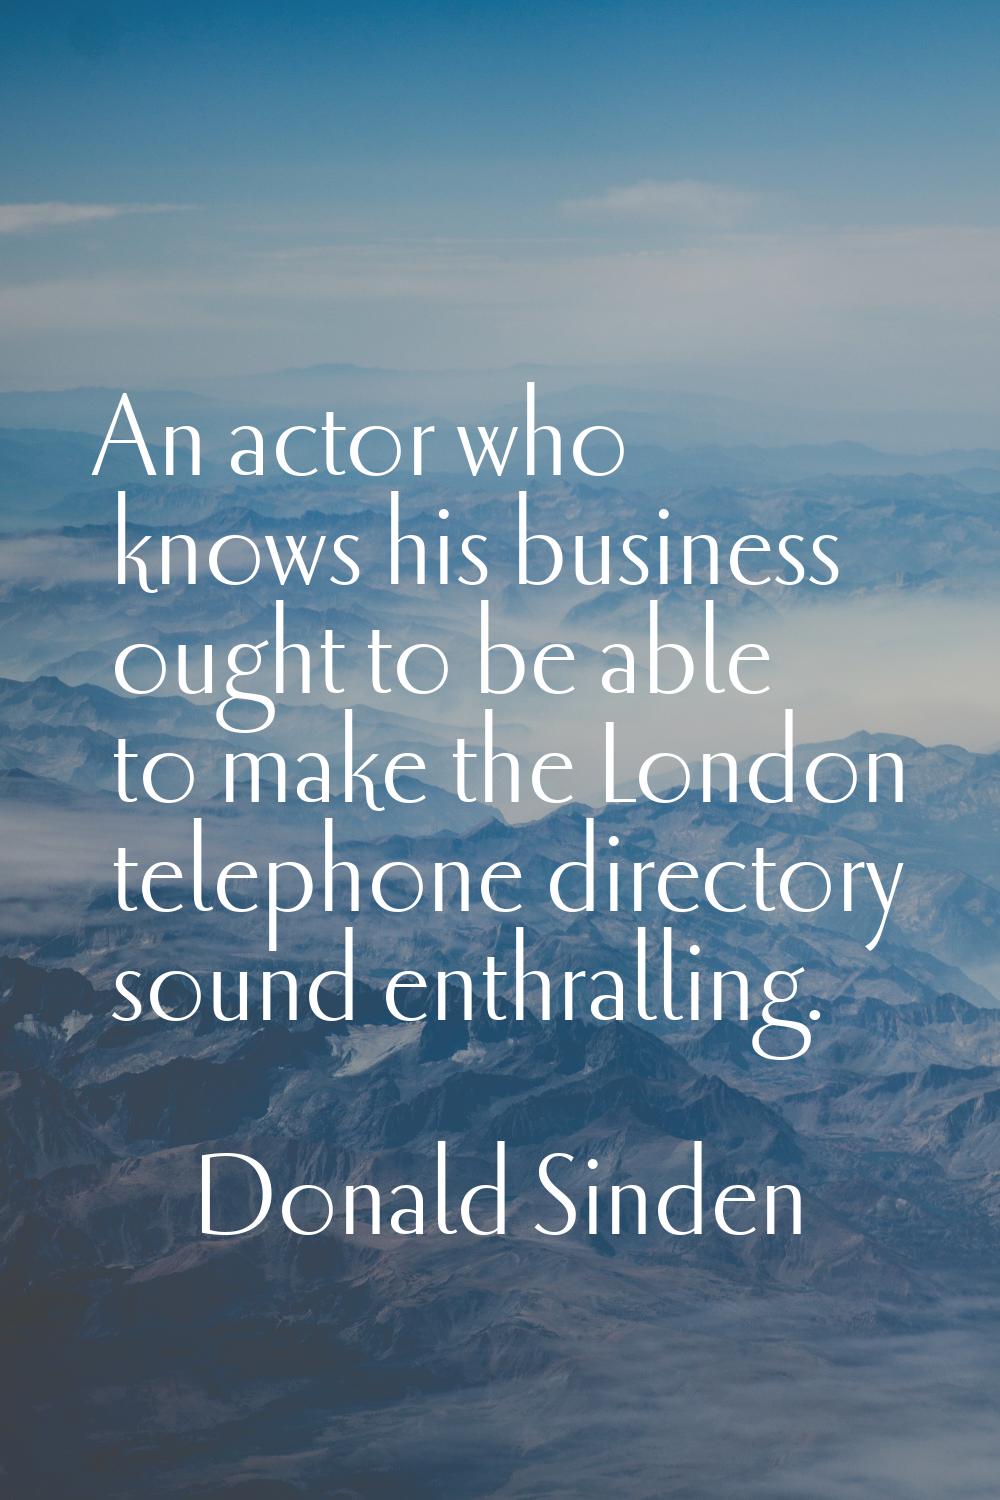 An actor who knows his business ought to be able to make the London telephone directory sound enthr